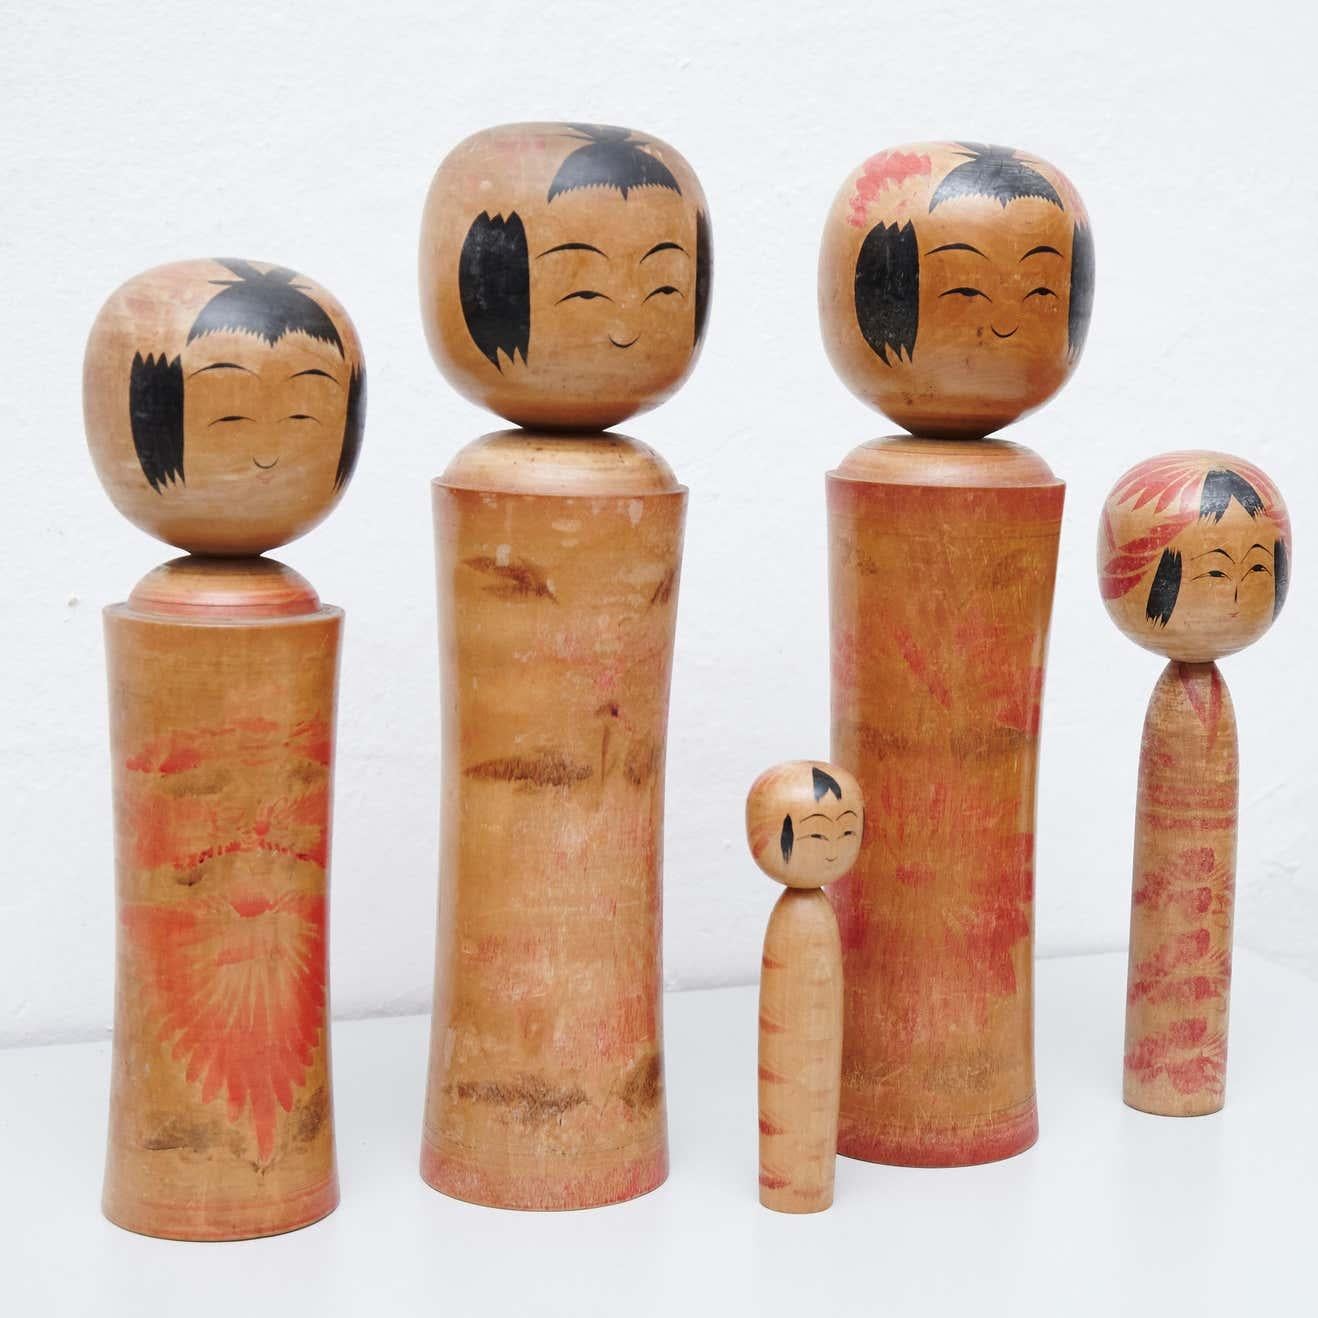 Add a touch of traditional Japanese charm to your home decor with this exquisite set of 5 Kokeshi dolls. Handmade by skilled artisans from wood, each doll features a simple trunk as a body and an enlarged head with lines defining the face. One